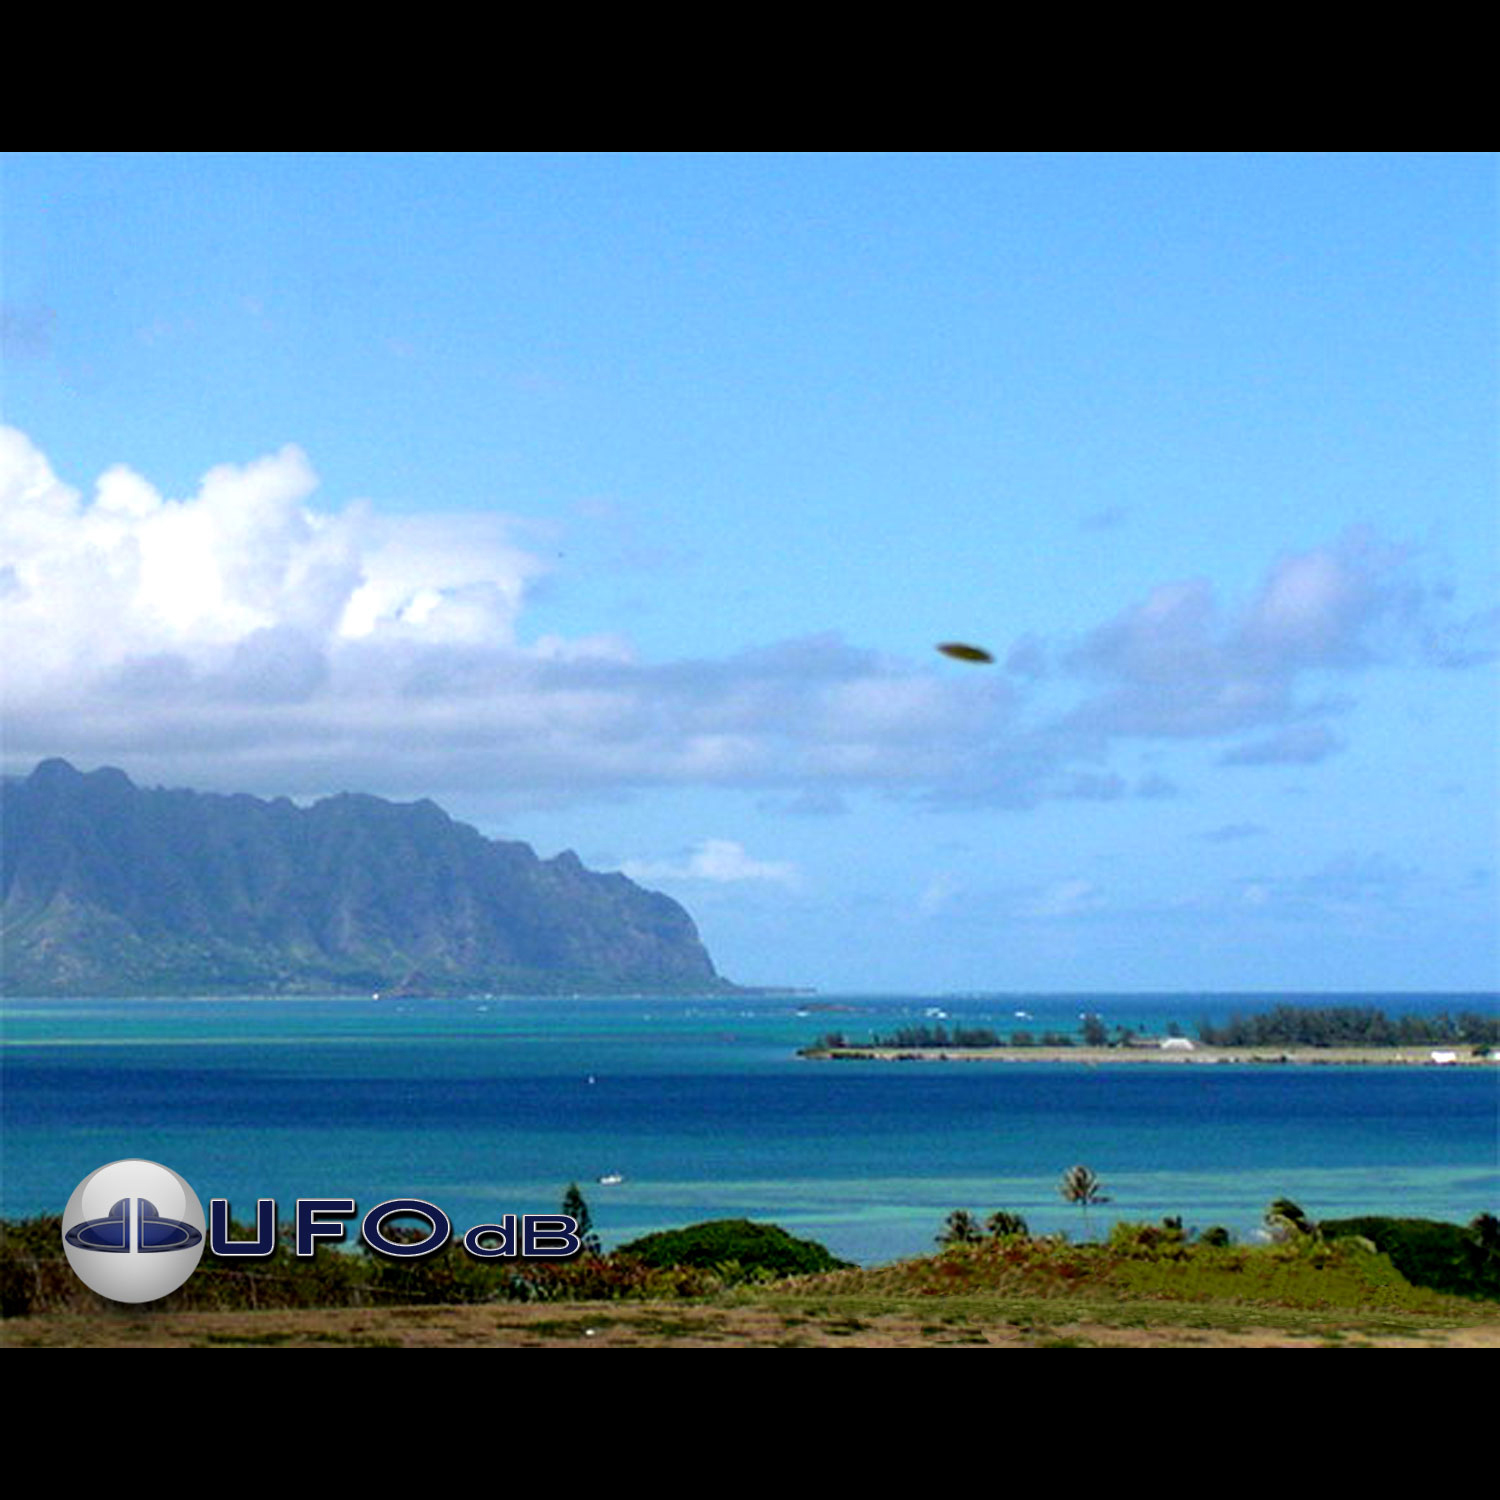 UFO picture taken on october 21, 2004 over the Kaneohe Bay in Hawaii UFO Picture #13-1